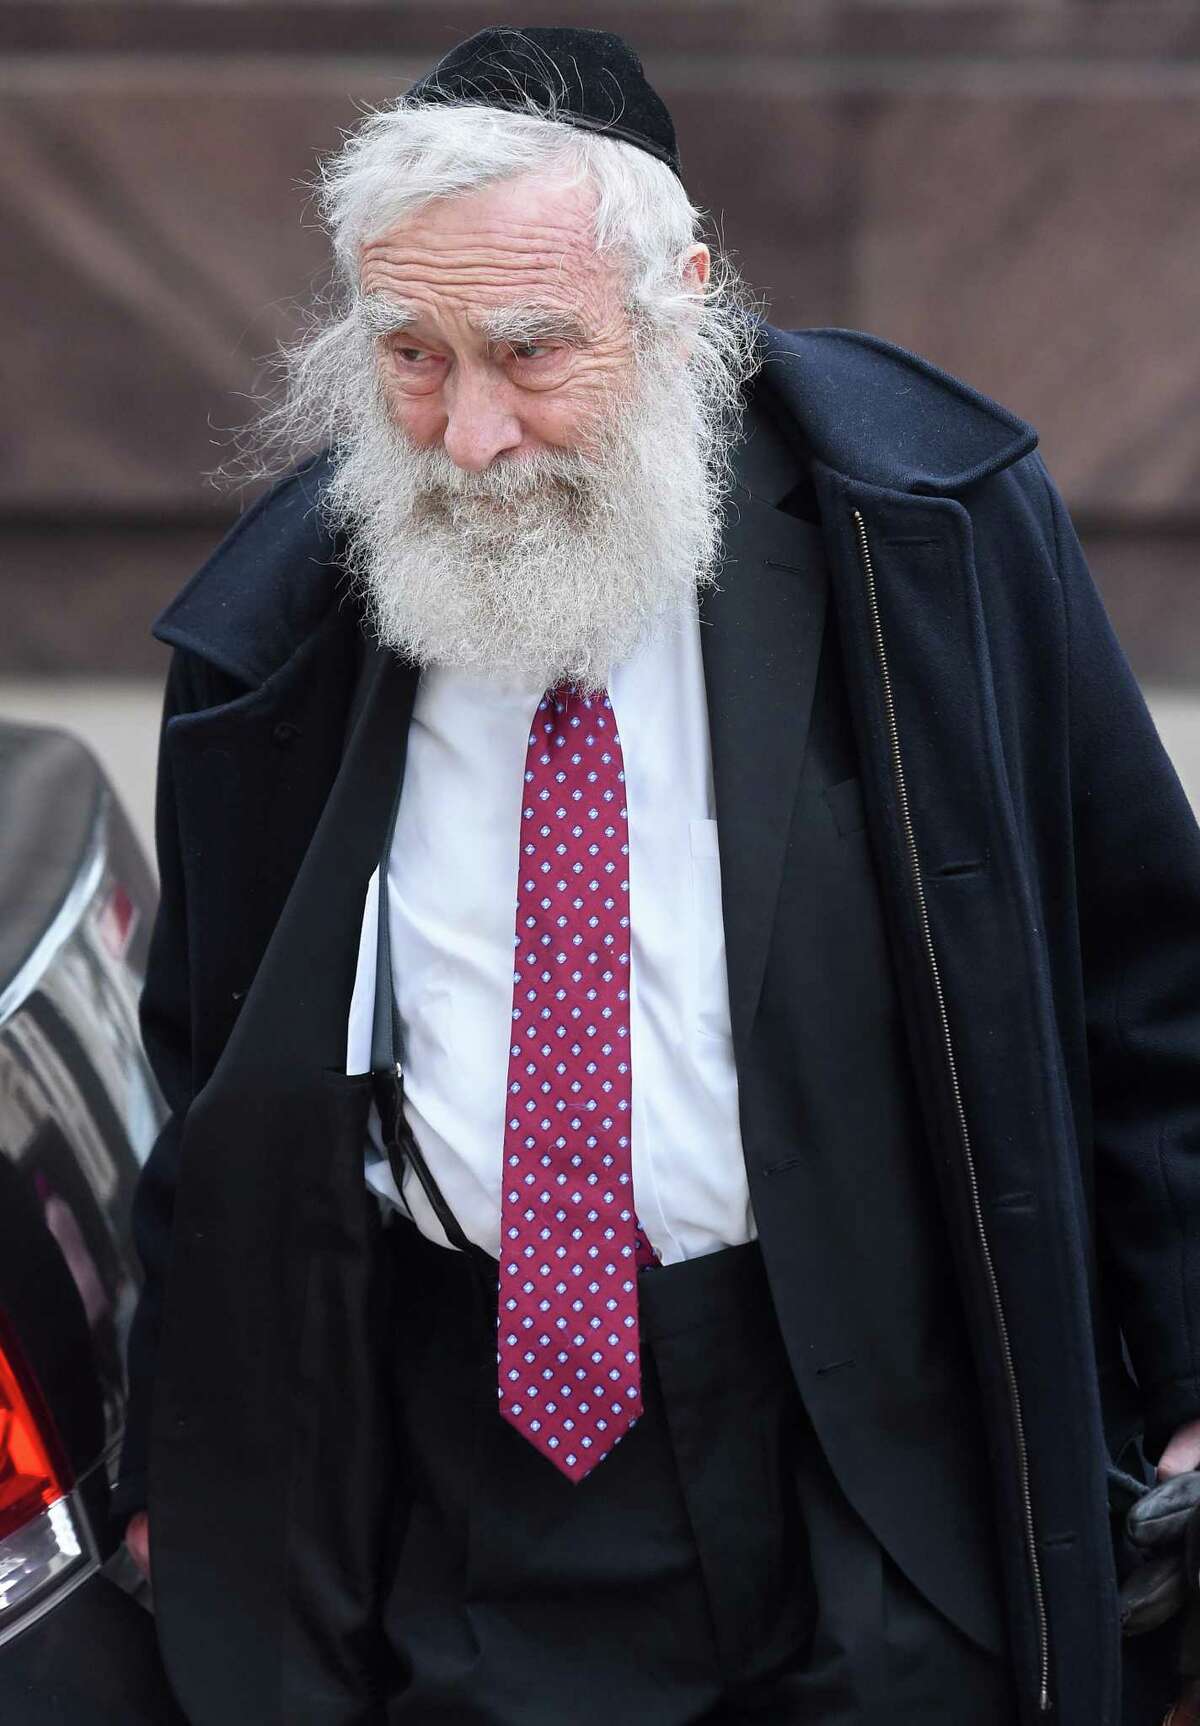 In this file photo, Rabbi Daniel Greer walks to New Haven Superior Court in New Haven on Nov. 20, 2019.